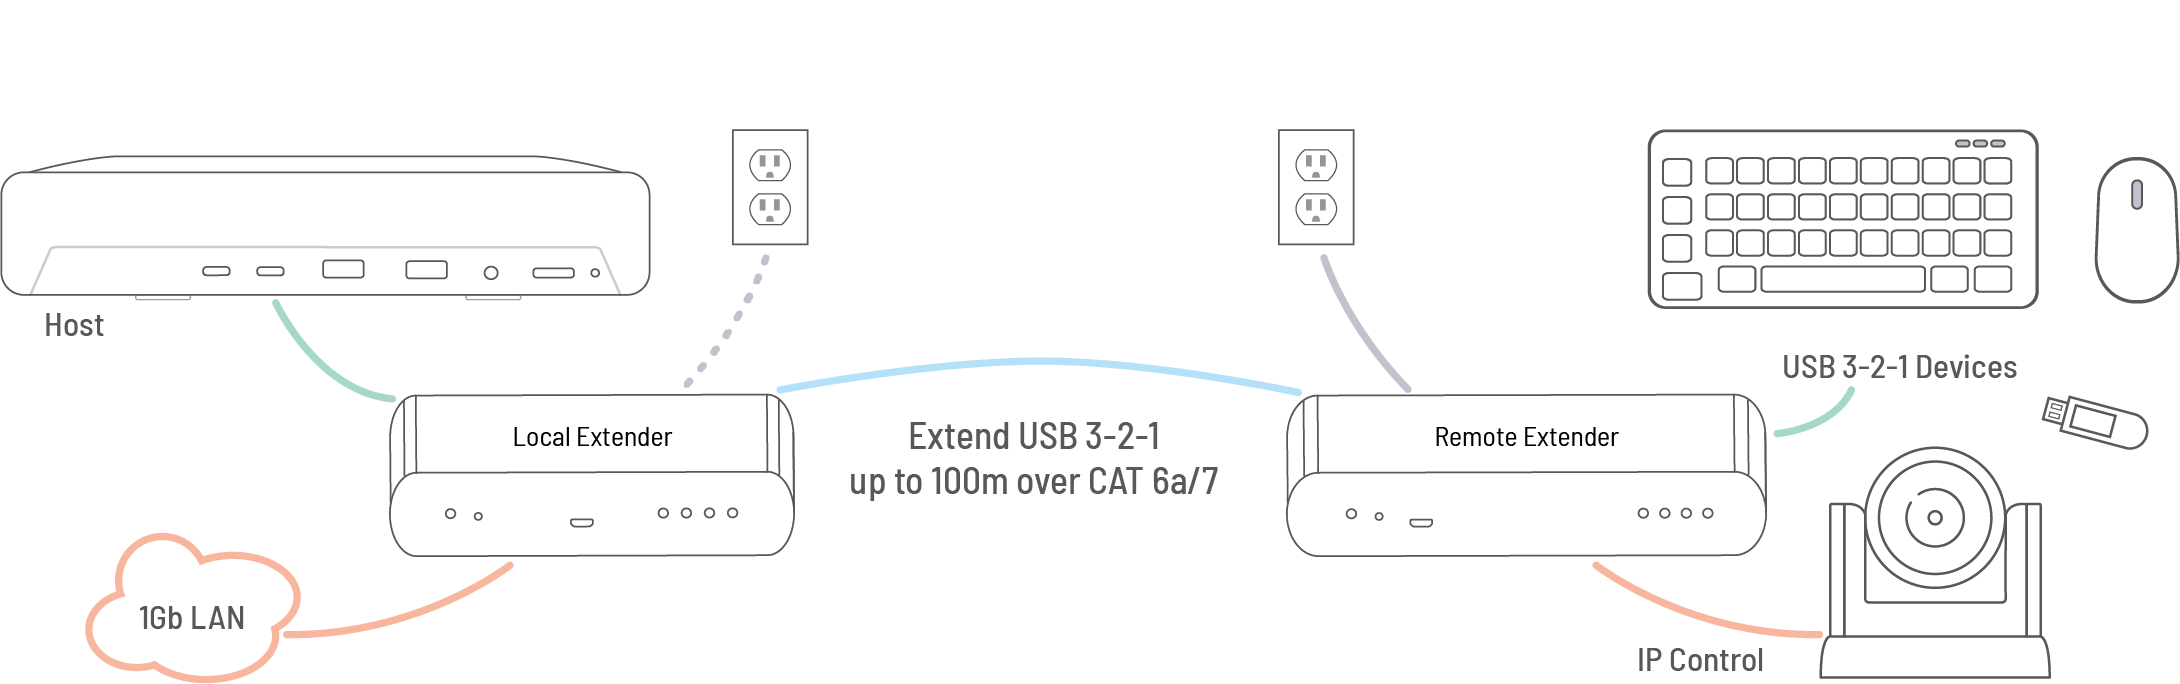 USB 3-2-1 Raven 3204C 100m CAT 6a/7 Point-to-Point Extender System Application Diagram